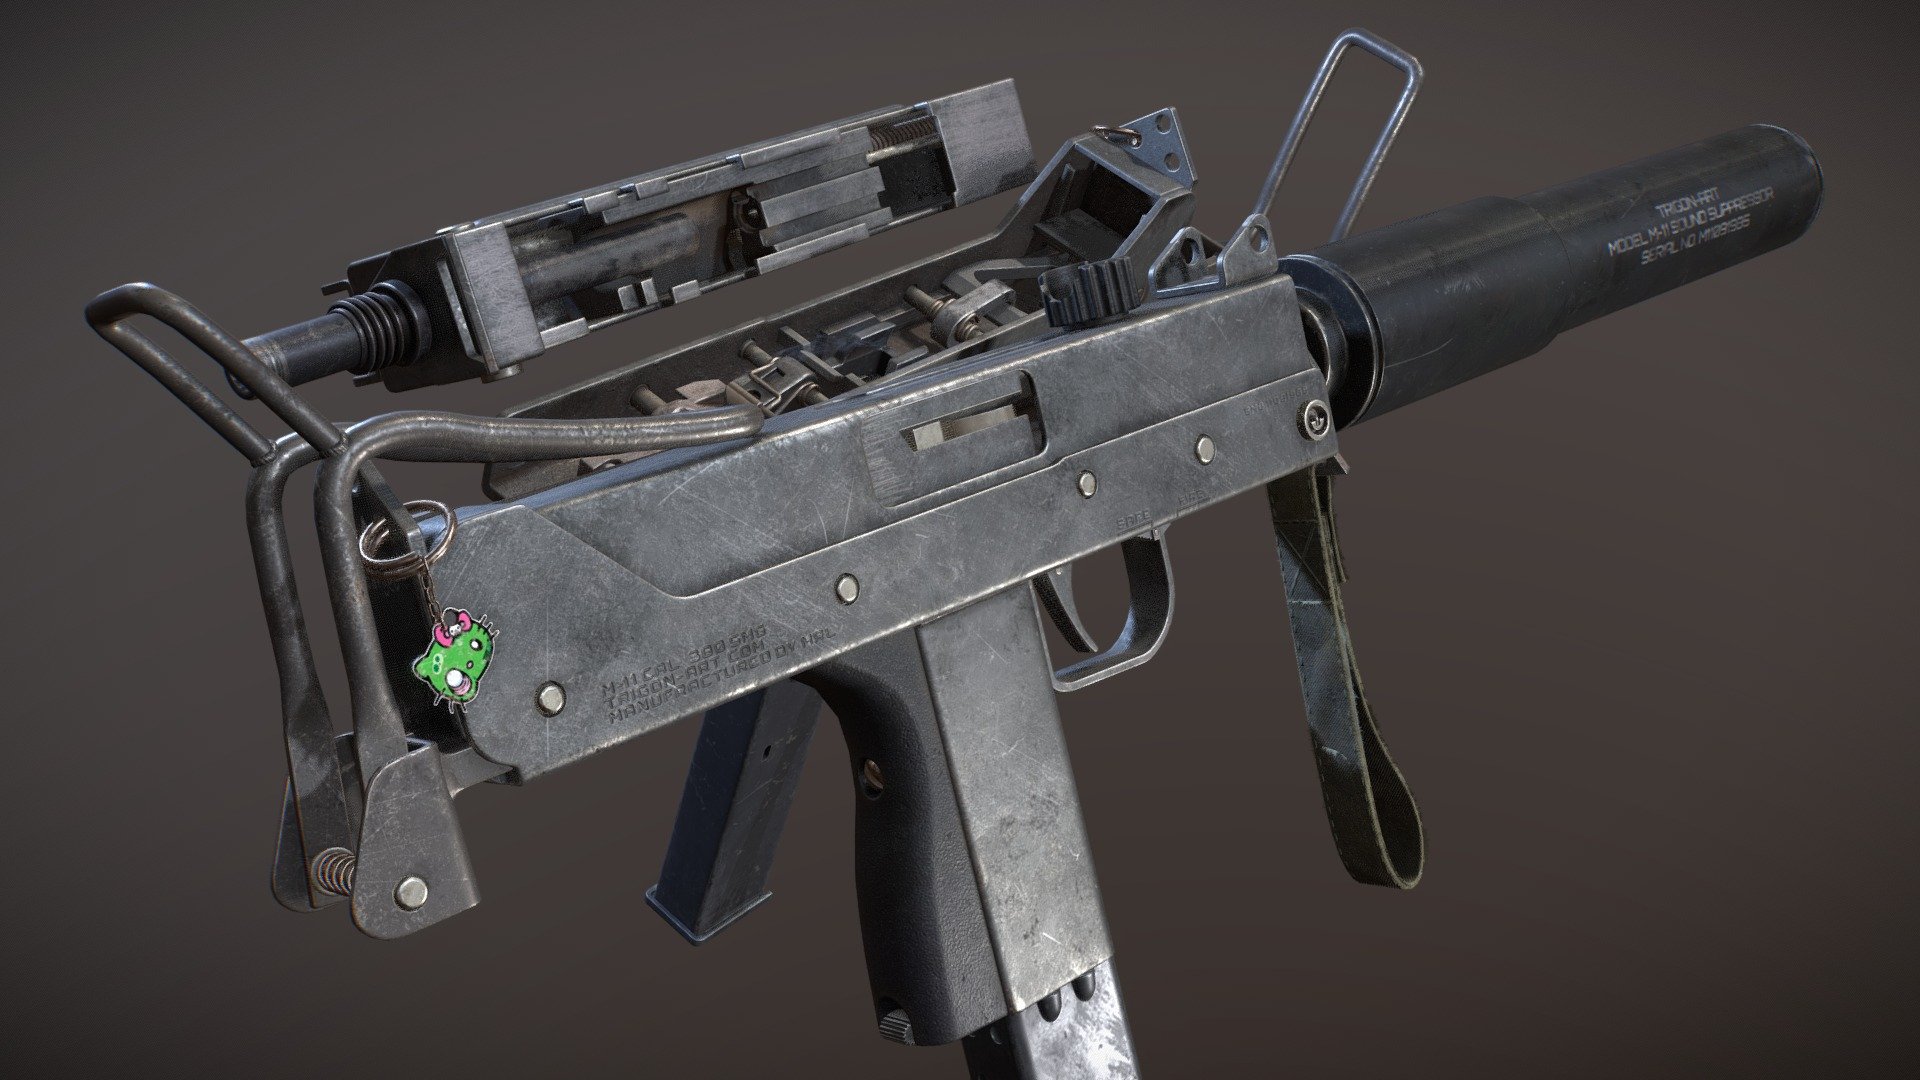 Just another Mac 11 with the addition to have some insight to the technical parts of the weapon.

Main
PBR Mac 11.
VR ready asset with a high attention for details.

Textures
Mac 11 comes with 3 Textures:
Attachments
Inner Parts
Mac 11
Everything is provided in 2k textures.

Unreal Metalness: BaseColor, Normal, Occl/Rough/Metal 
Unity Metallic: Albedo/Transp, Normal, Metallic/Smooth

Mesh
The Mac 11 is ready for rigging and import.
Inner parts can be removed due to a seperate texture.
.fbx

General Information
This weapon is best used for VR experience due to it´s high details.
All parts which can move are seperate and ready for rigging and import.
The Mac 11 includes: Attachments such as suppressor and charm. Also the insights are seperate and can be moved out.

No ammunition included 3d model